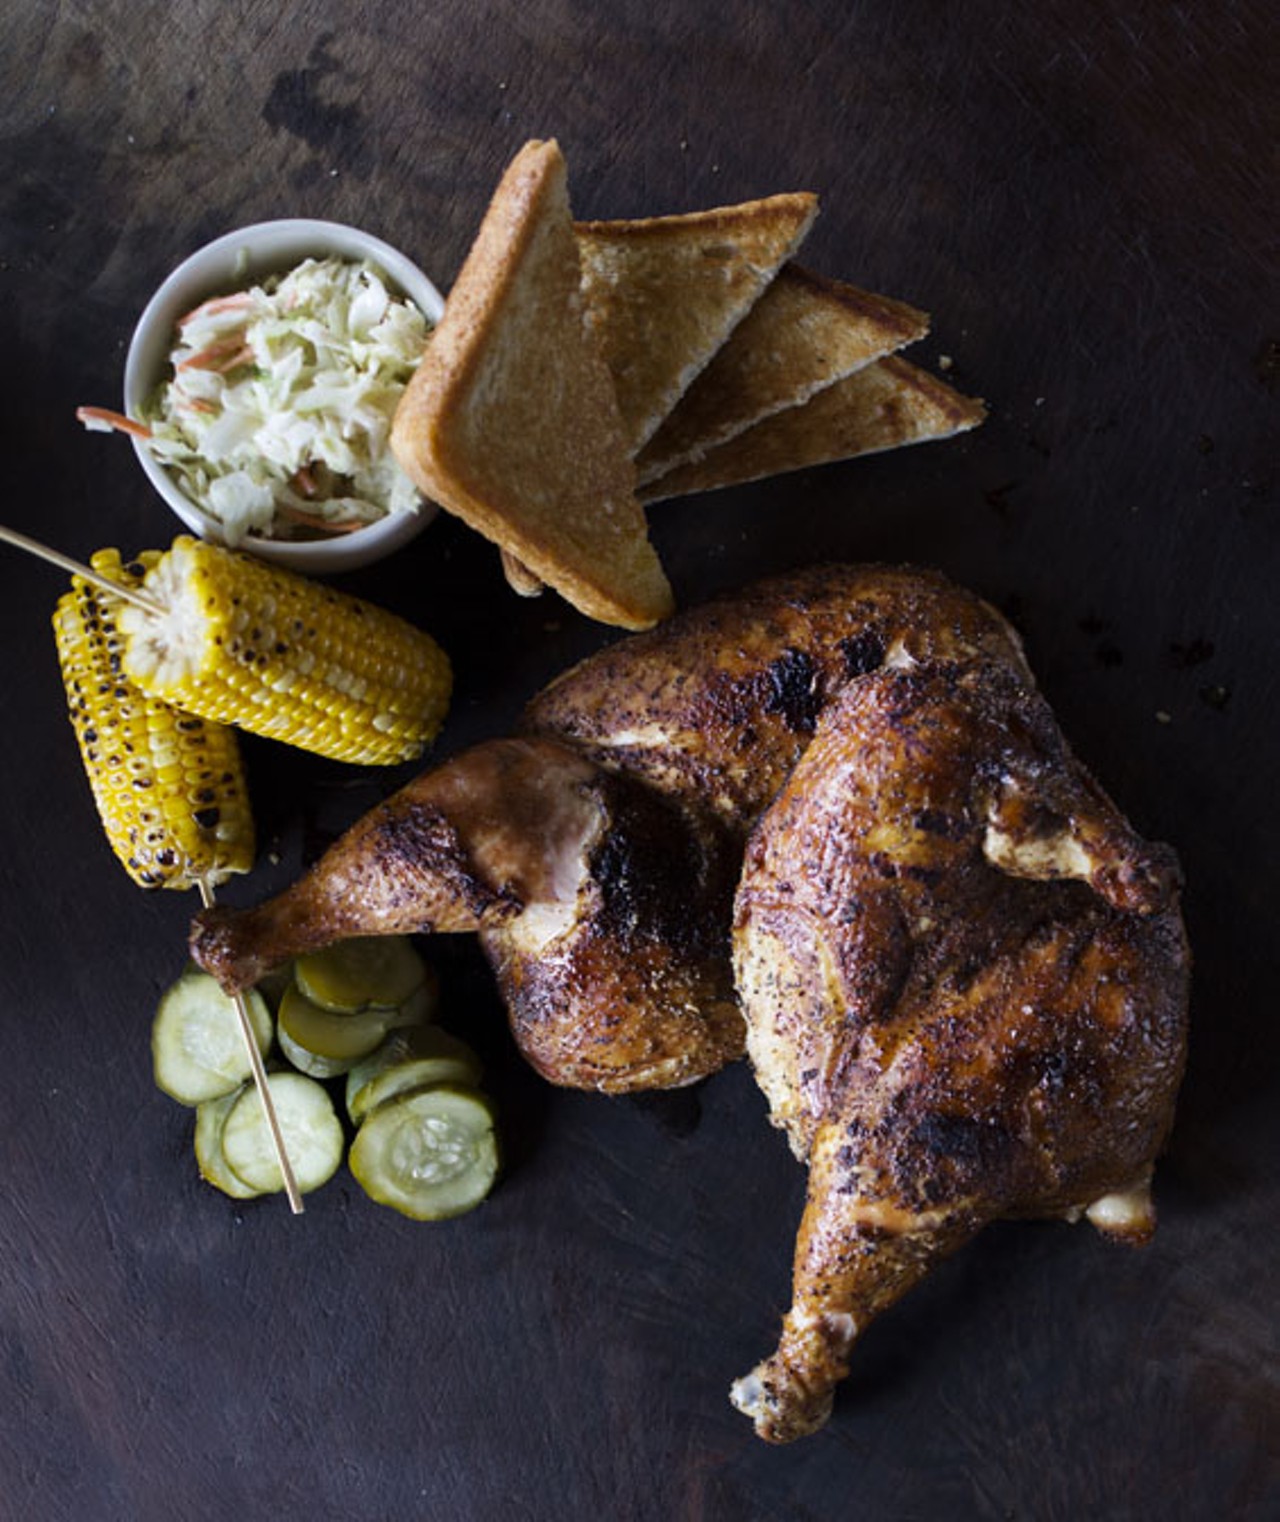 Half chickens with corn on the cob and slaw.